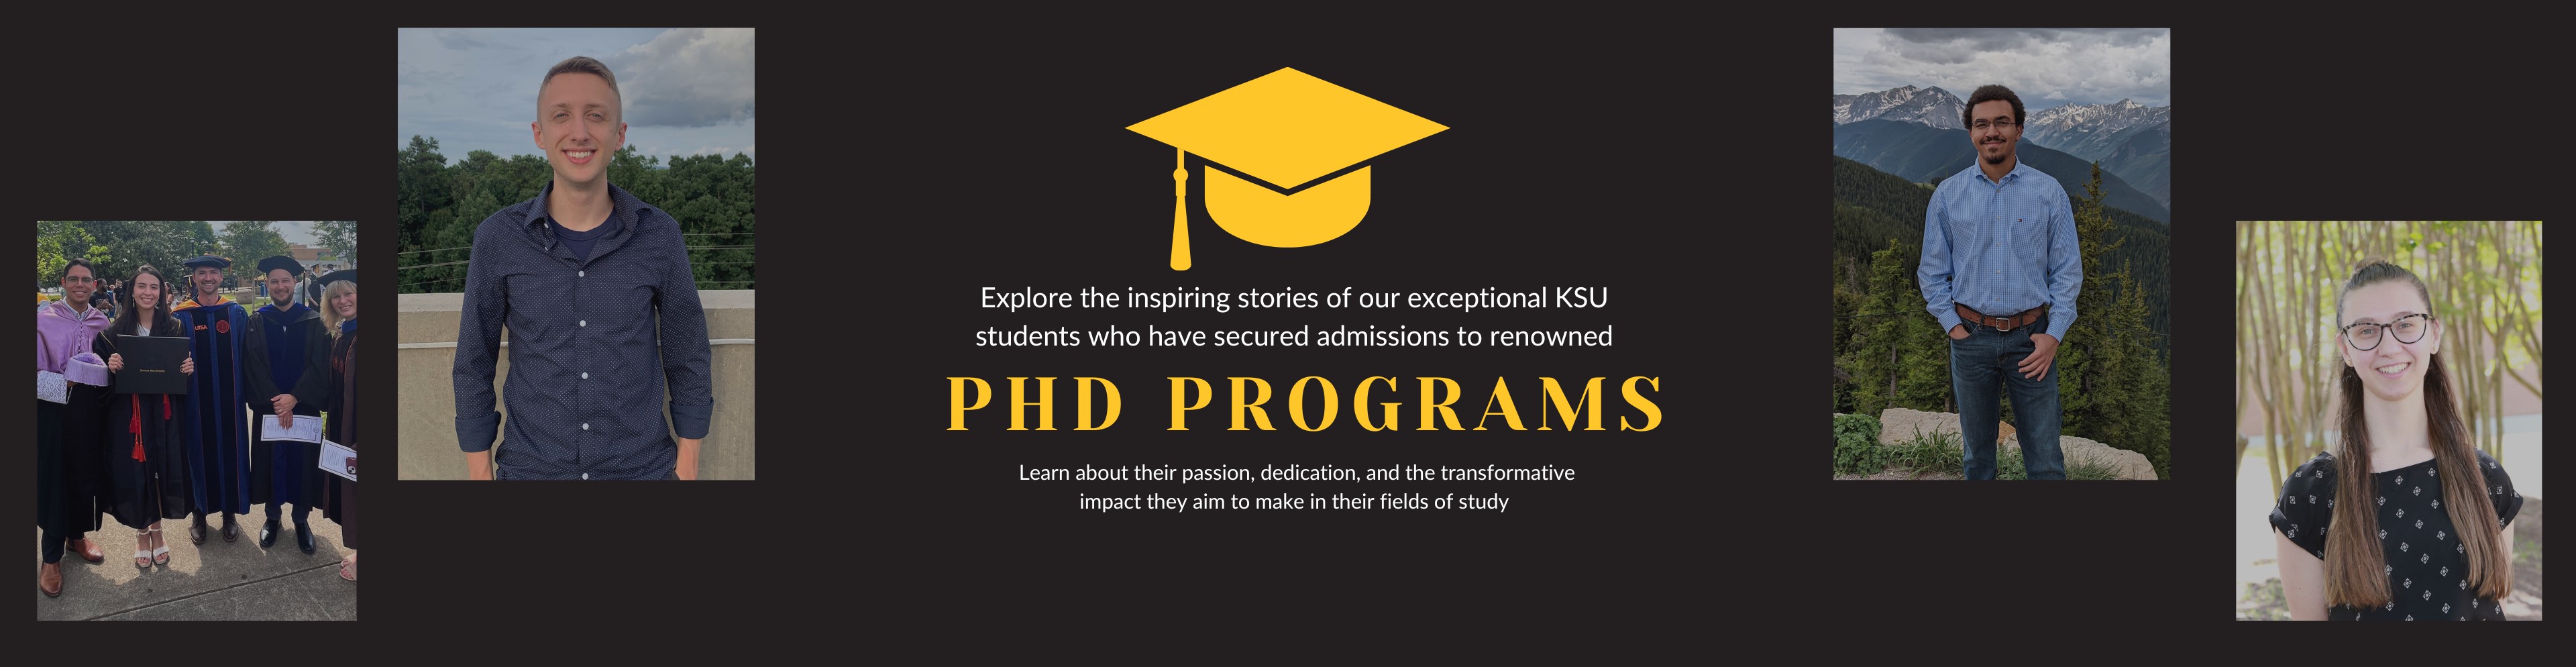 KSU student researchers accepted into PhD programs